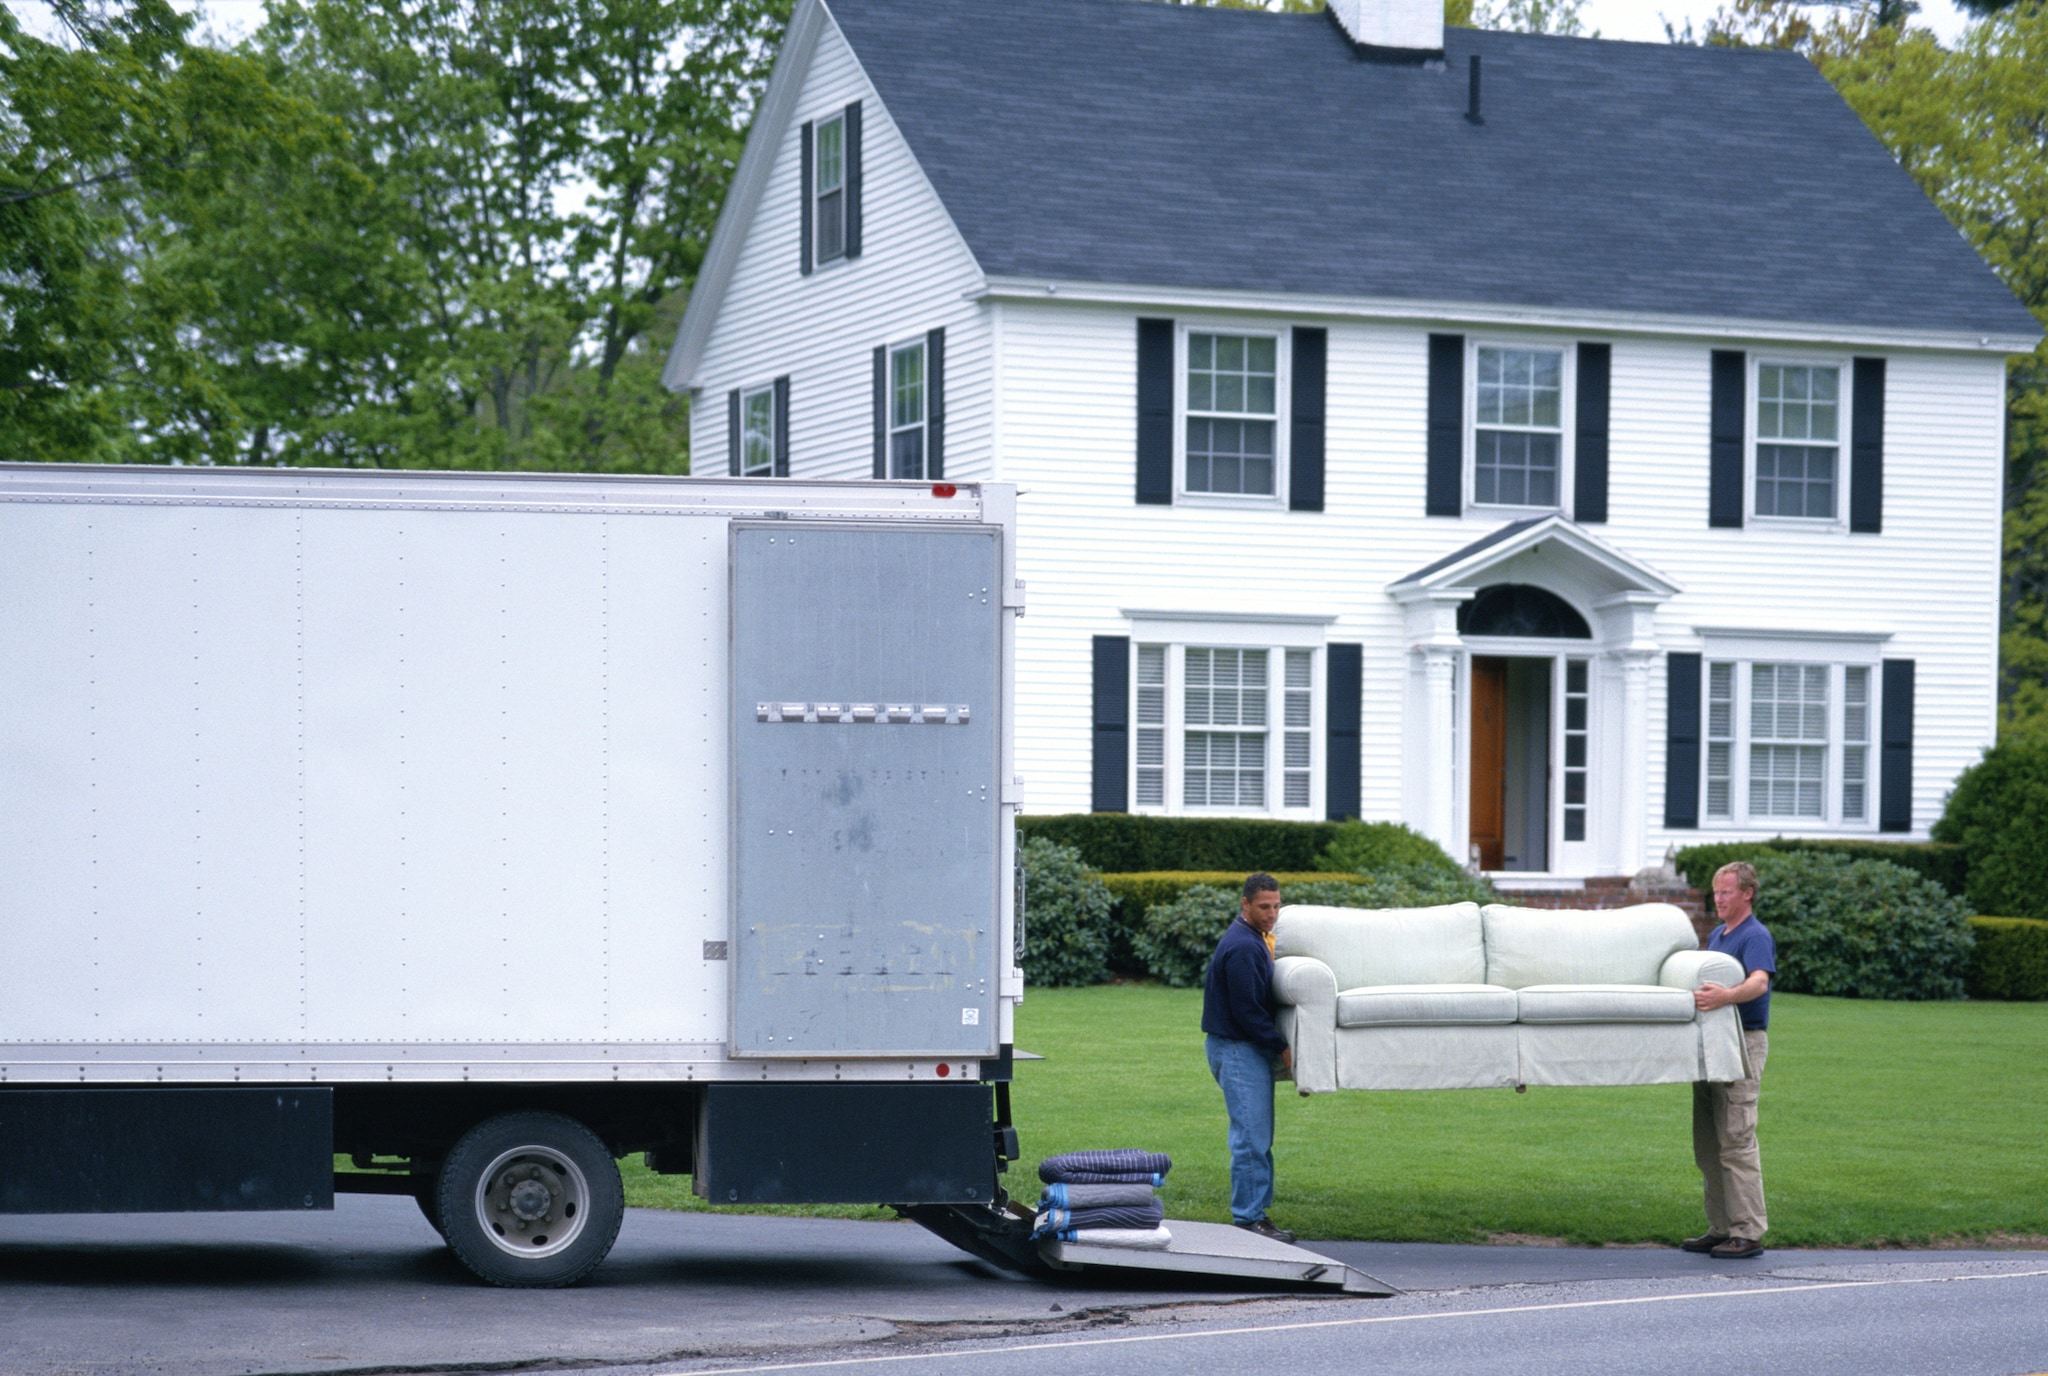 Two men move a white loveseat into a large moving truck in front of a white, two-story home.